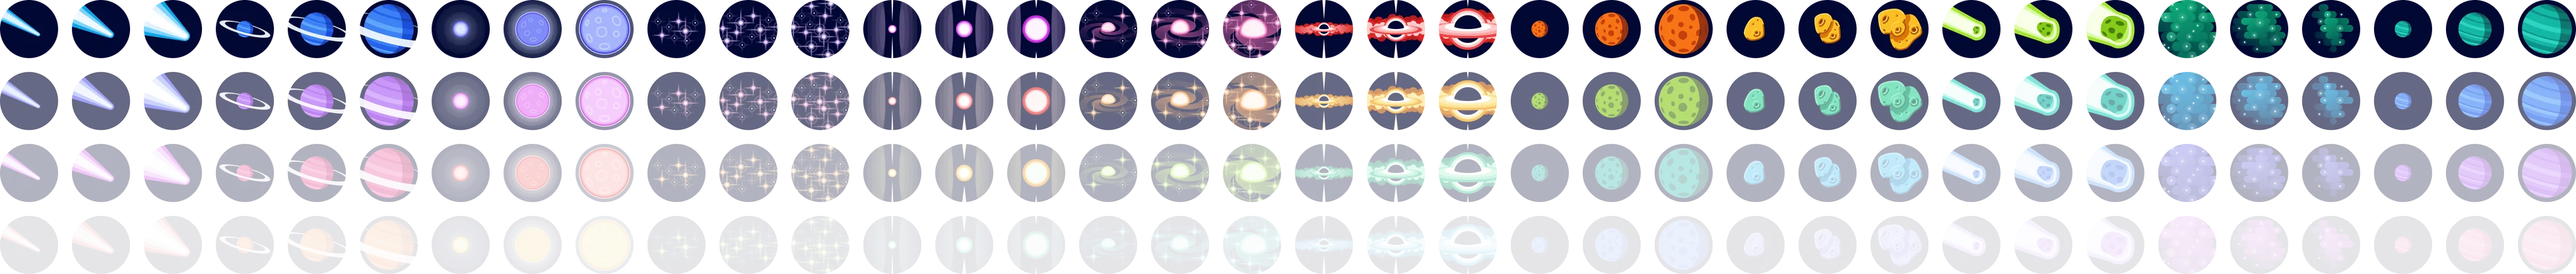 A dense grid of the celestial bodies in different colors and sizes, showing a preview of the variety you can get by making a matrix of a few properties